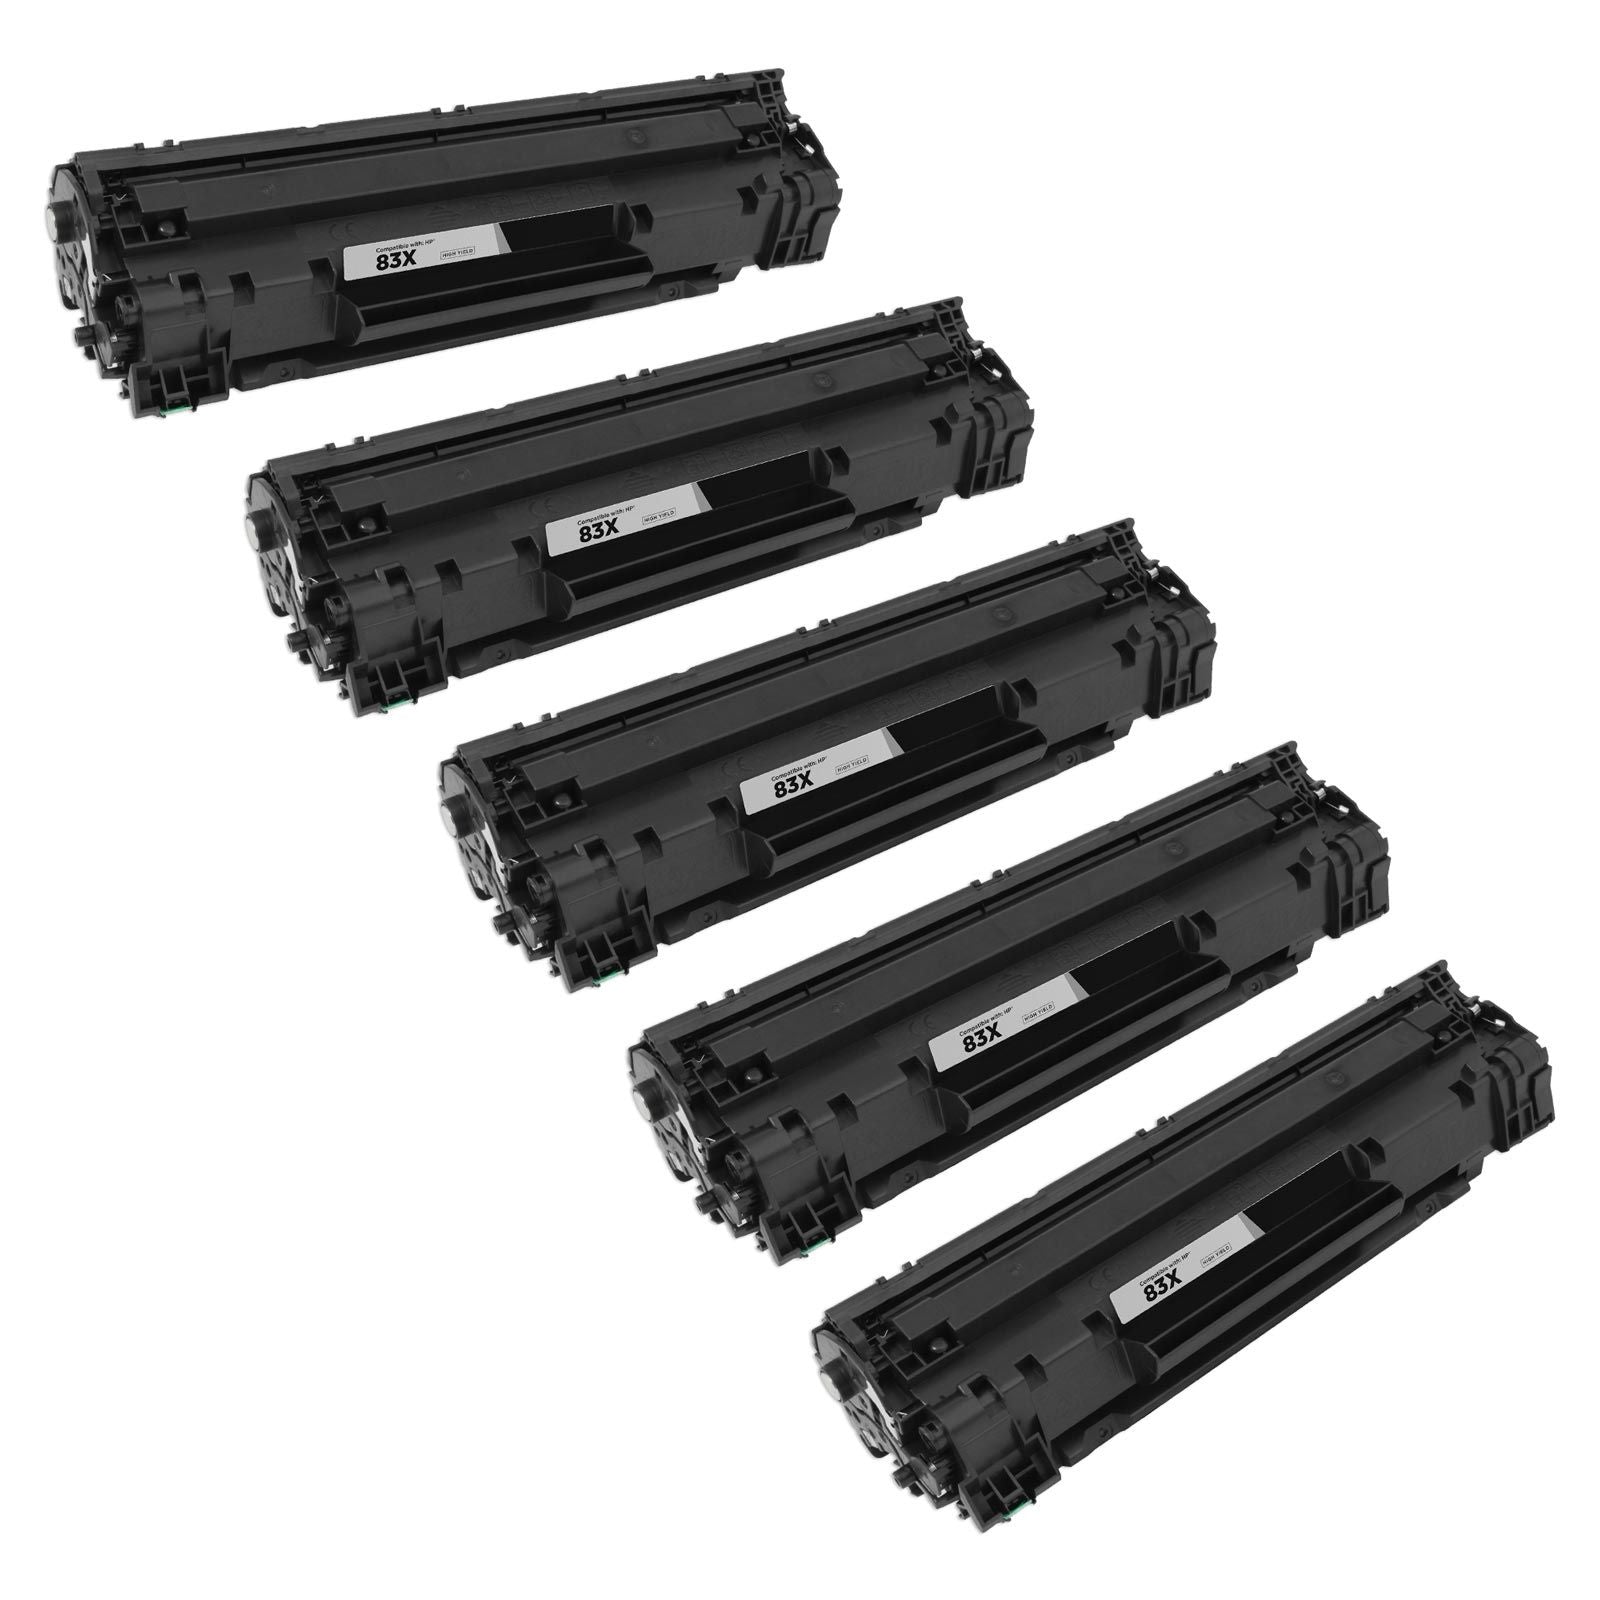 IMPERIAL BRAND Compatible CF283X toner cartridge for HP 83X  5 PACK HY LASER TONER 2,200 PAGES